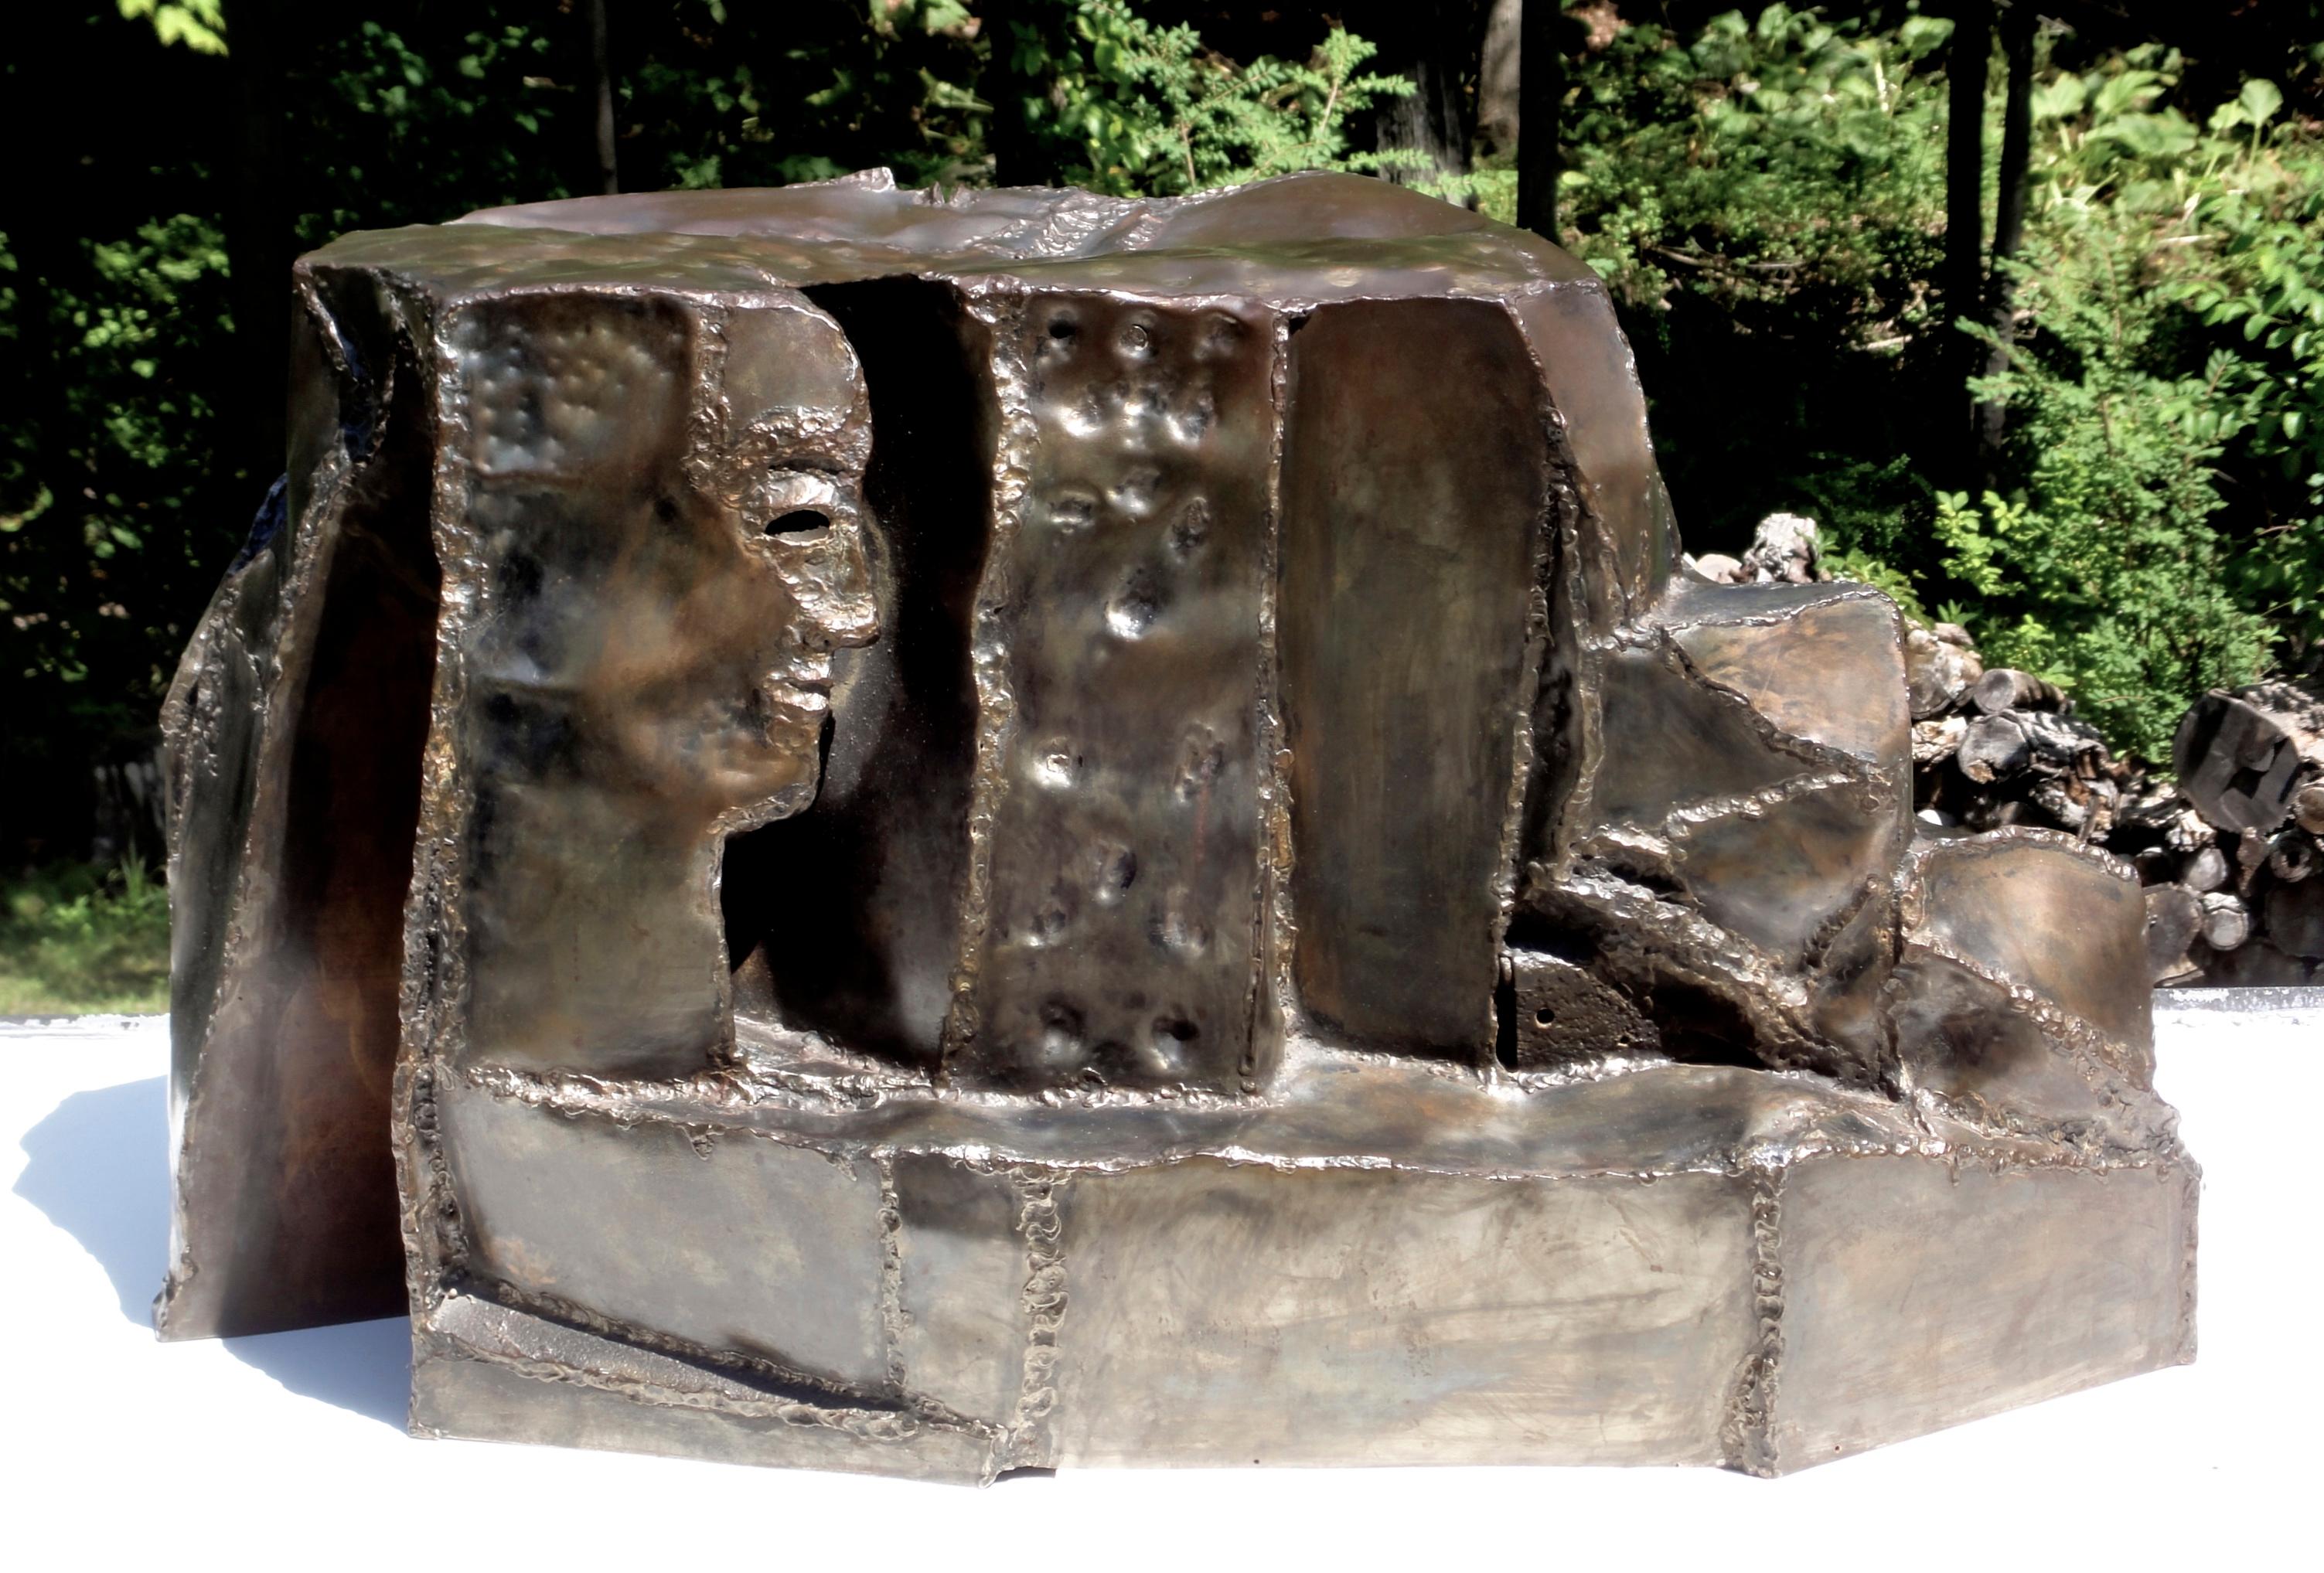 Suzanne Benton, Becoming, 1975, Copper, Coated Steel